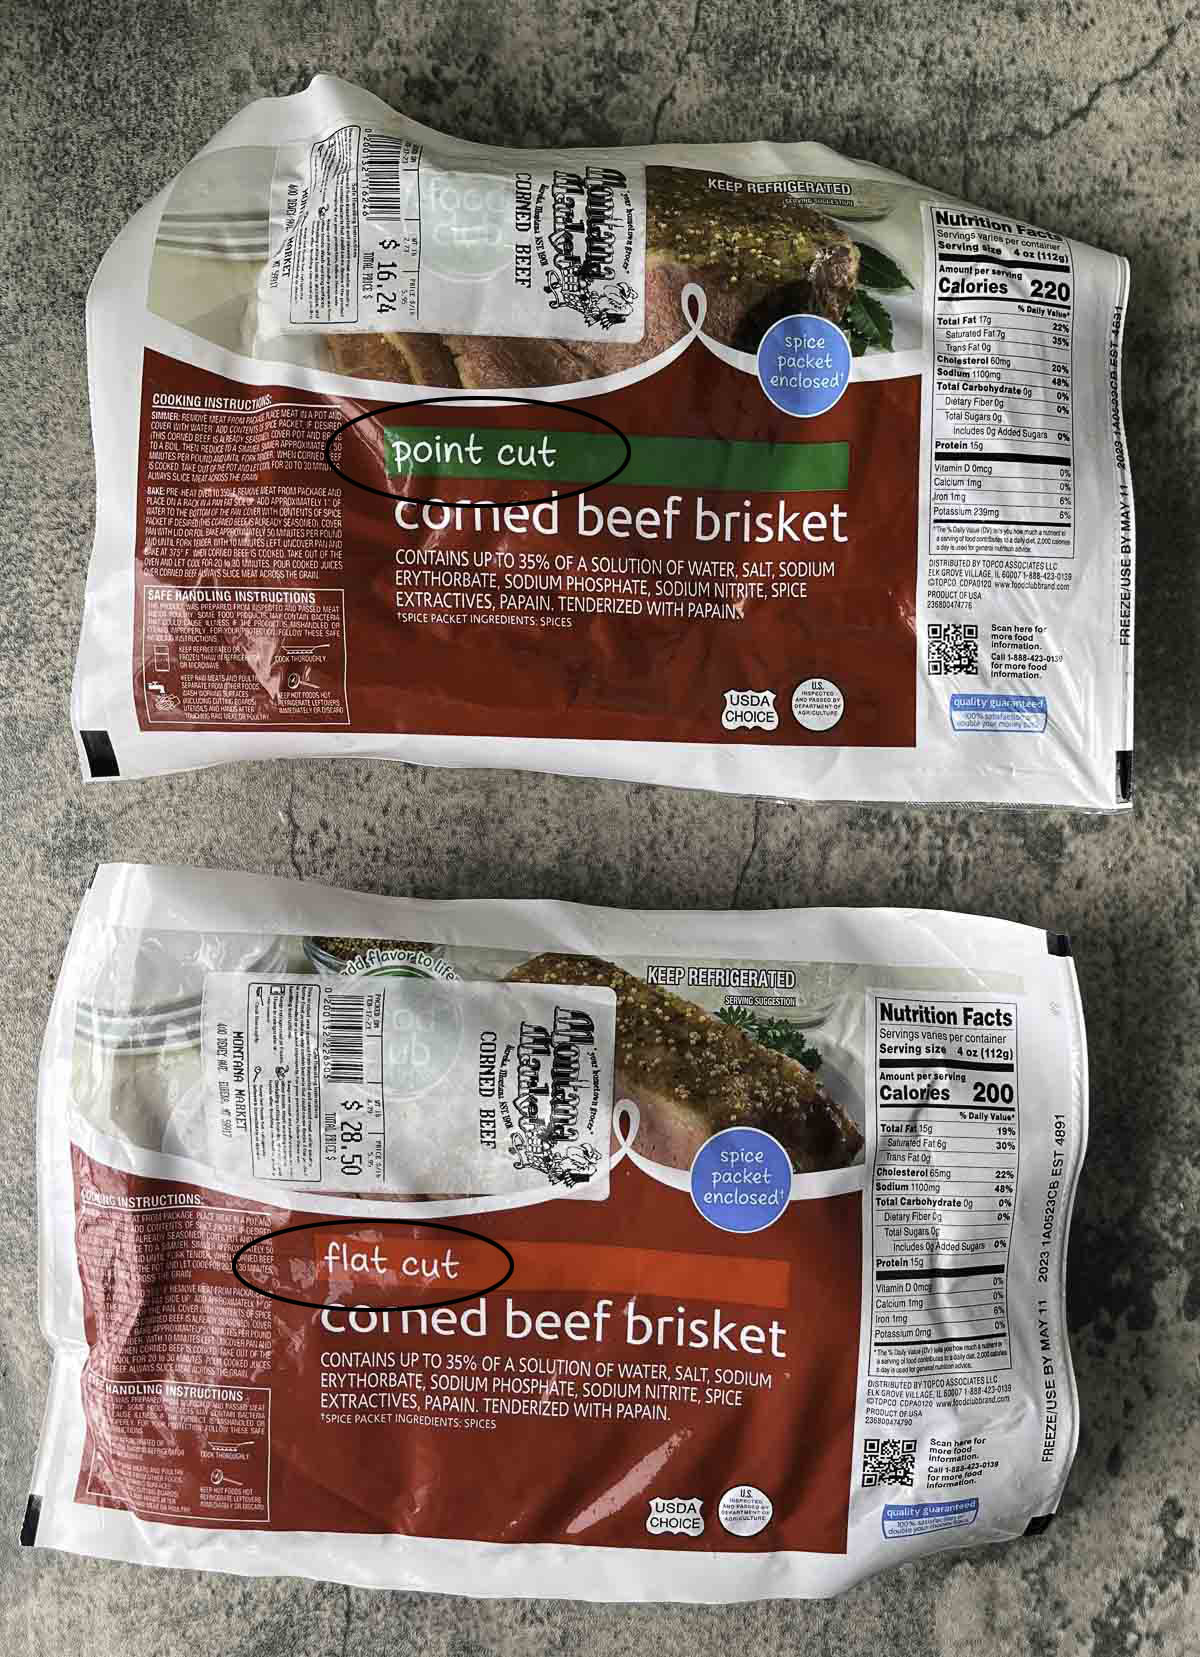 2 pakages of corned beef